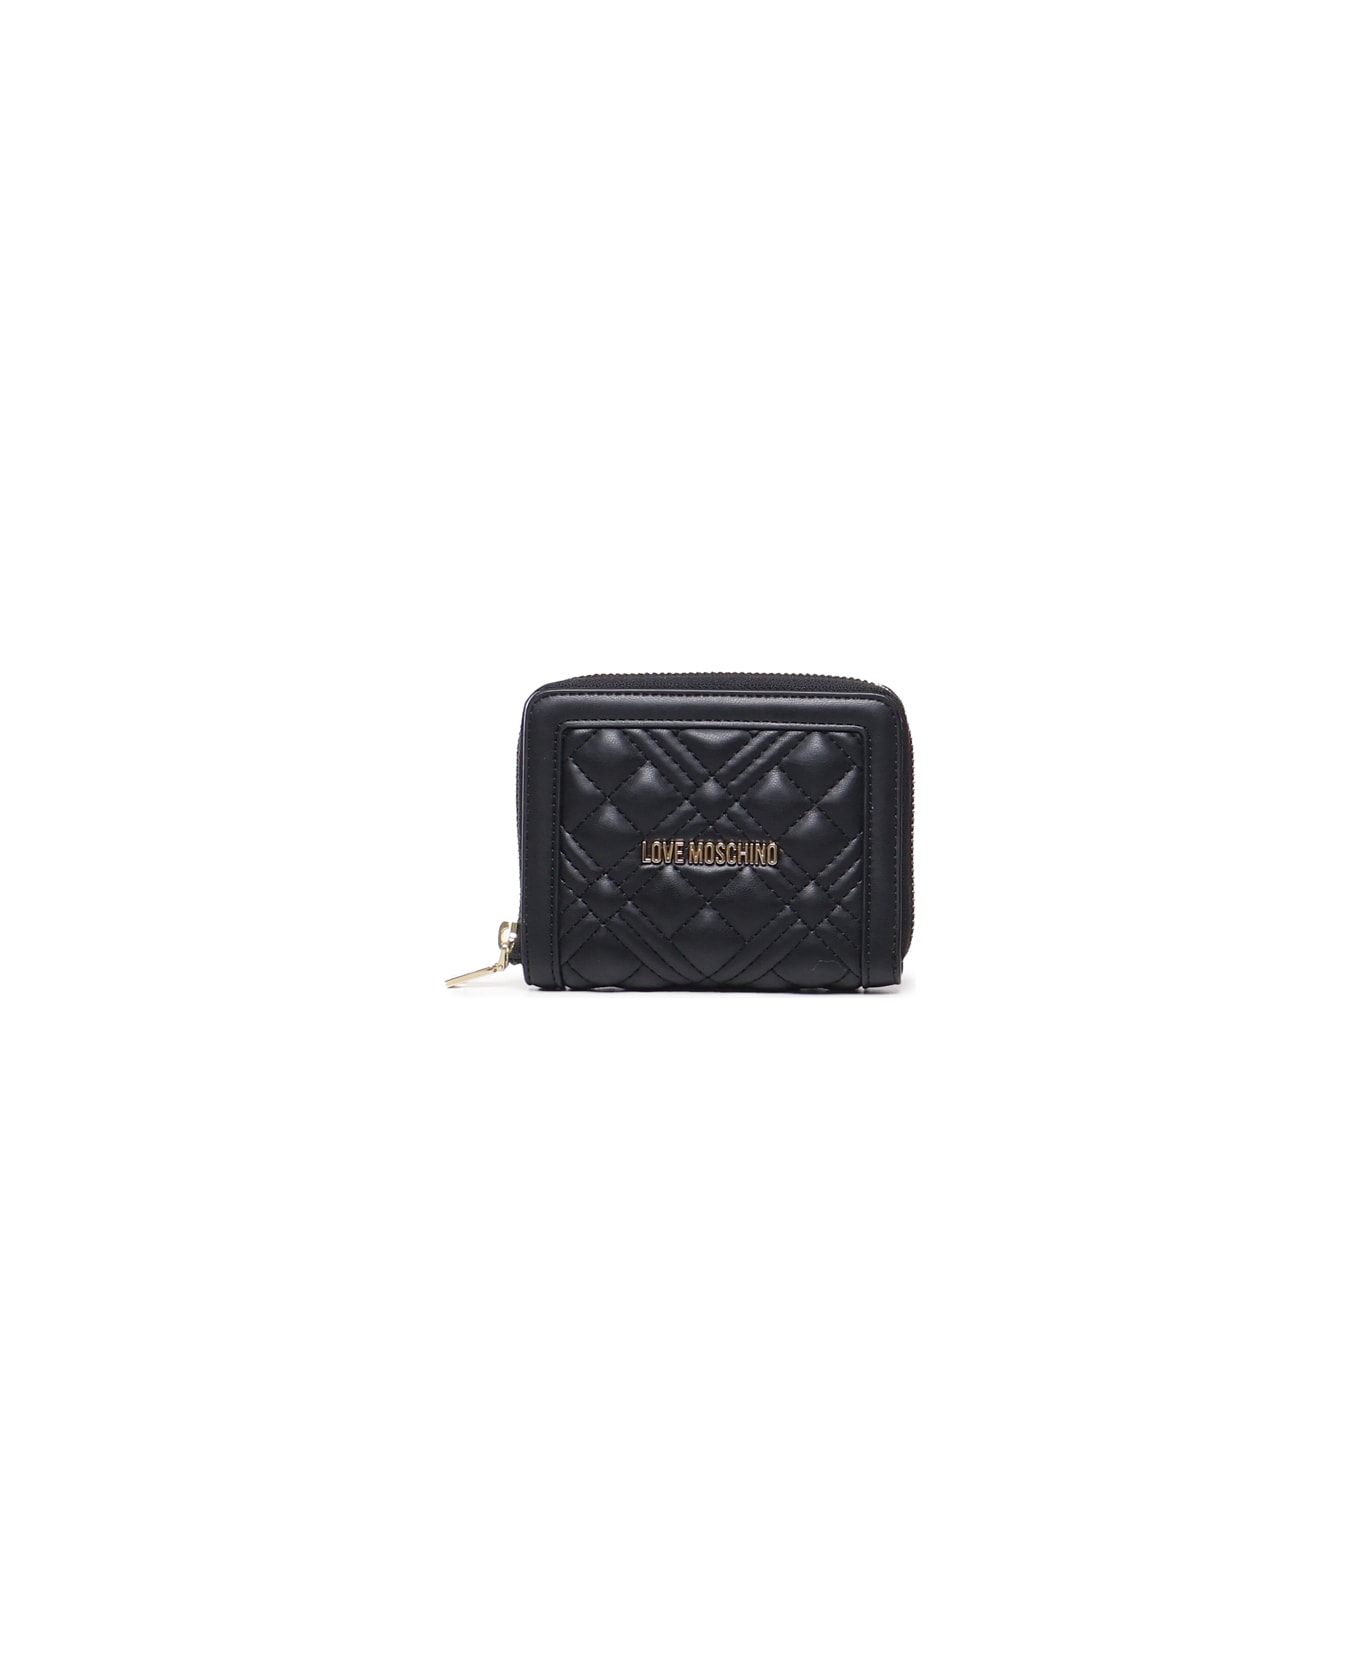 Love Moschino Wallet With Logo - Black 財布